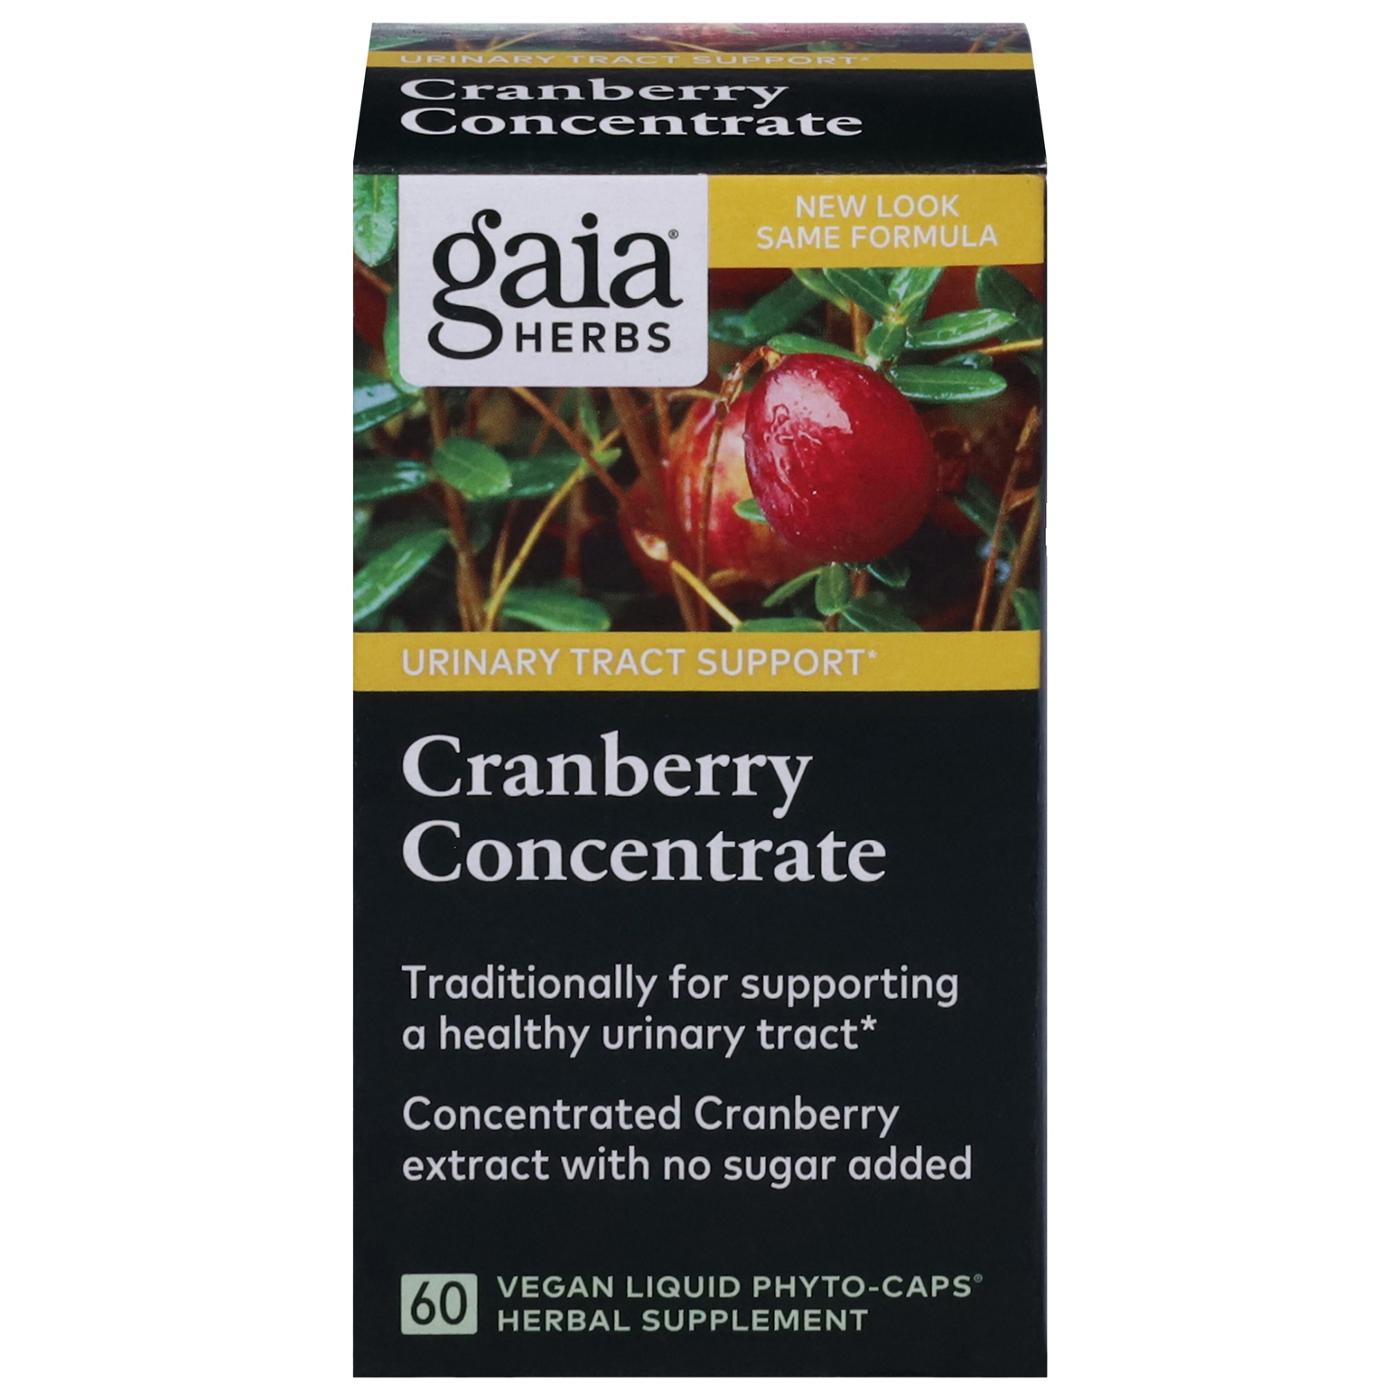 Gaia Herbs Cranberry Concentrate Urinary Tract Support Liquid Phyto-Caps; image 1 of 2